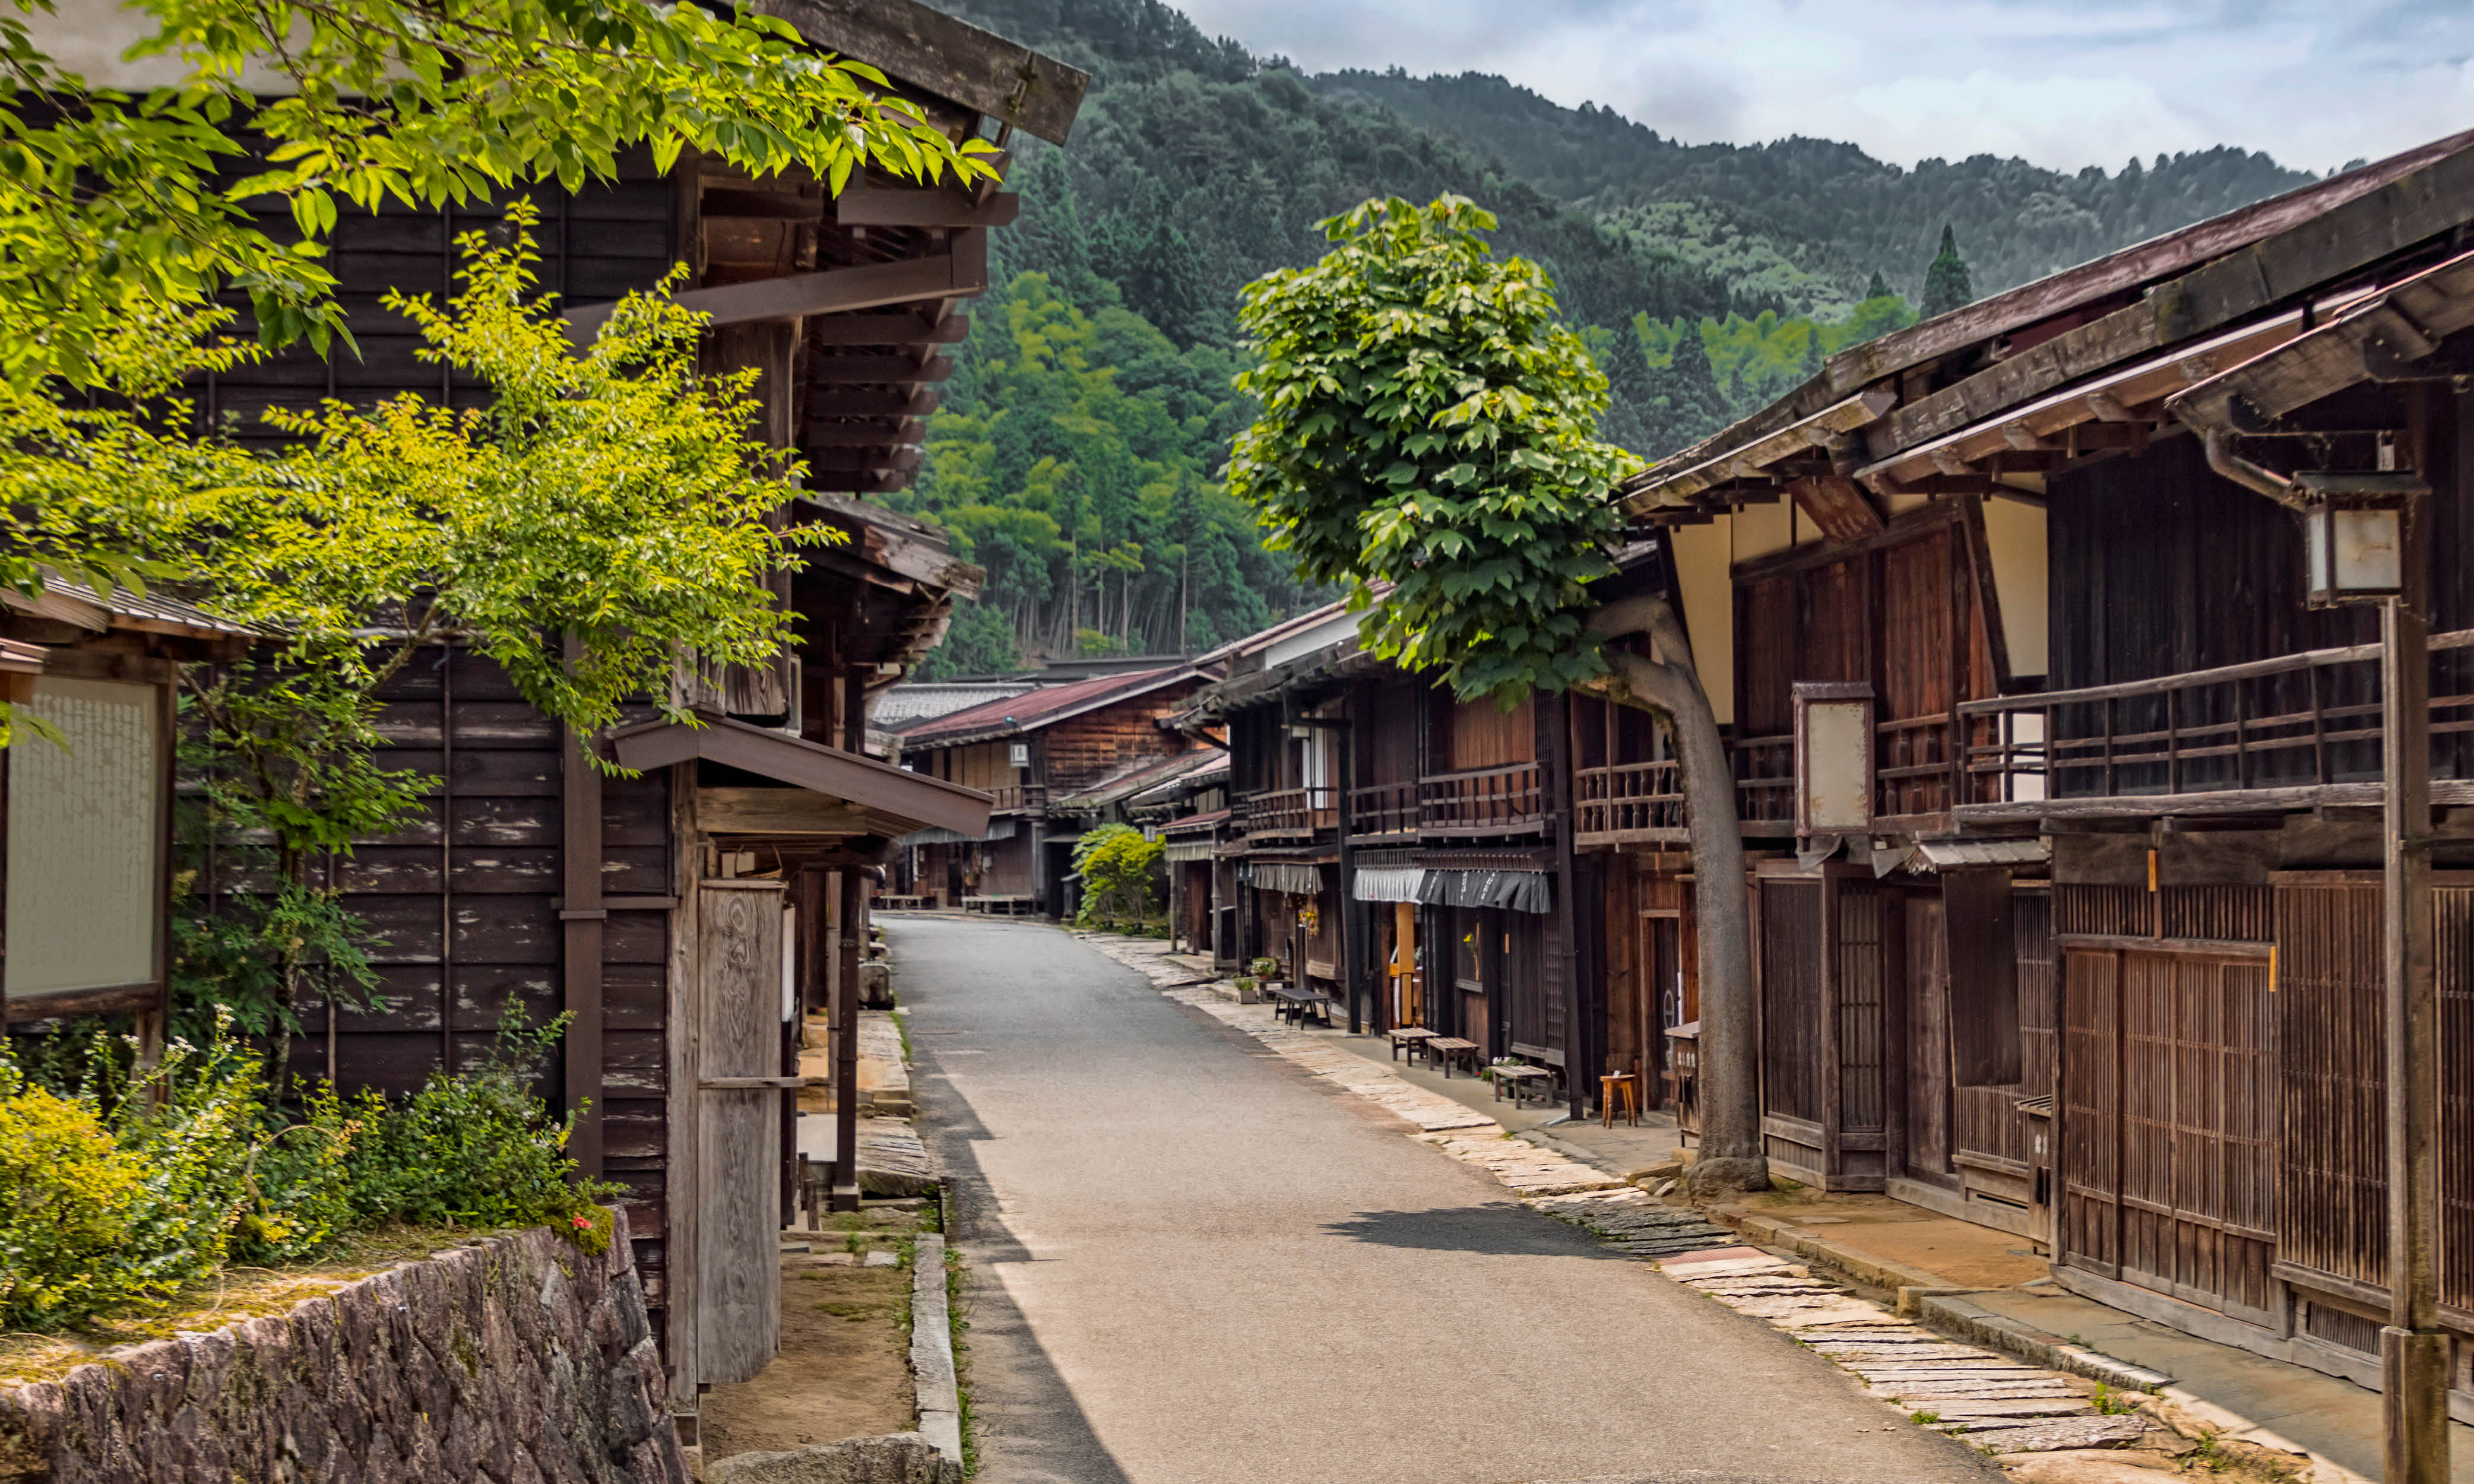 A walk through old Japan - holiday ideas for 2021